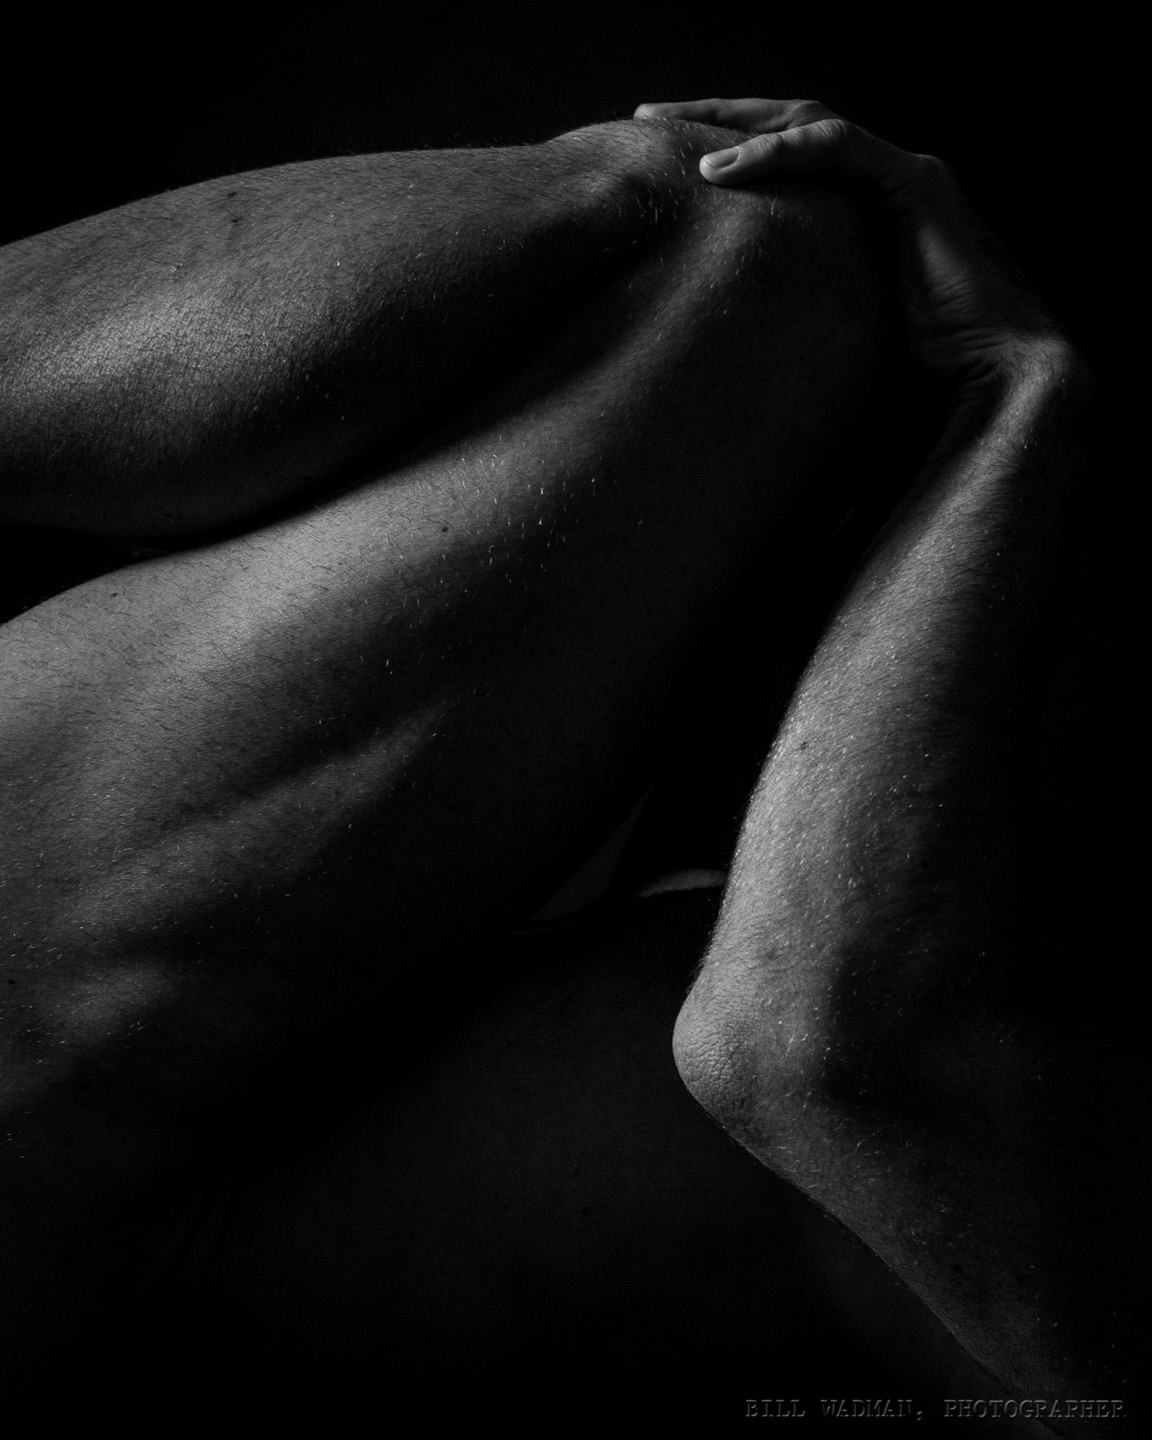 Male Nude Experiment - Black and White.